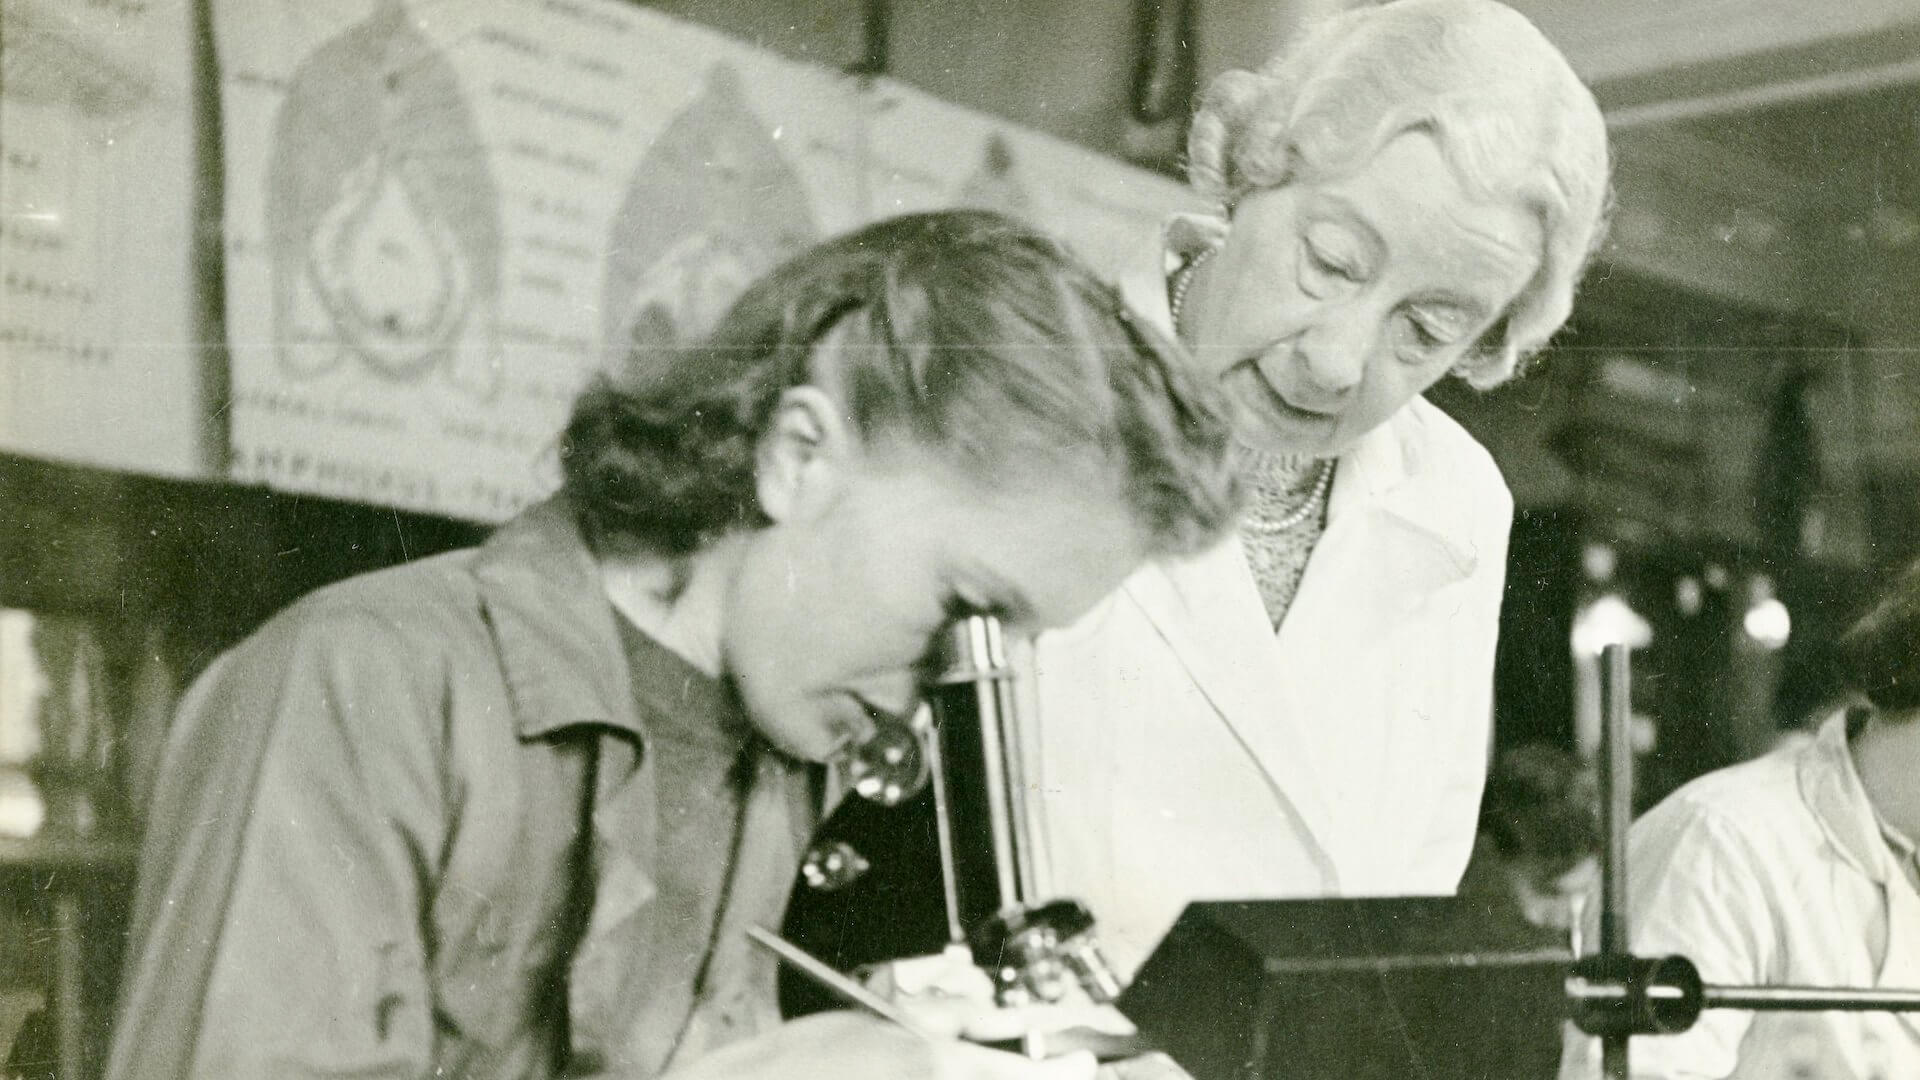 Photographs of student life at King’s, 1943, taken for a Picture Post article. Views of work in the Zoology lab include Professor Doris Mackinnon (in lab coat), the first woman professor at King’s..